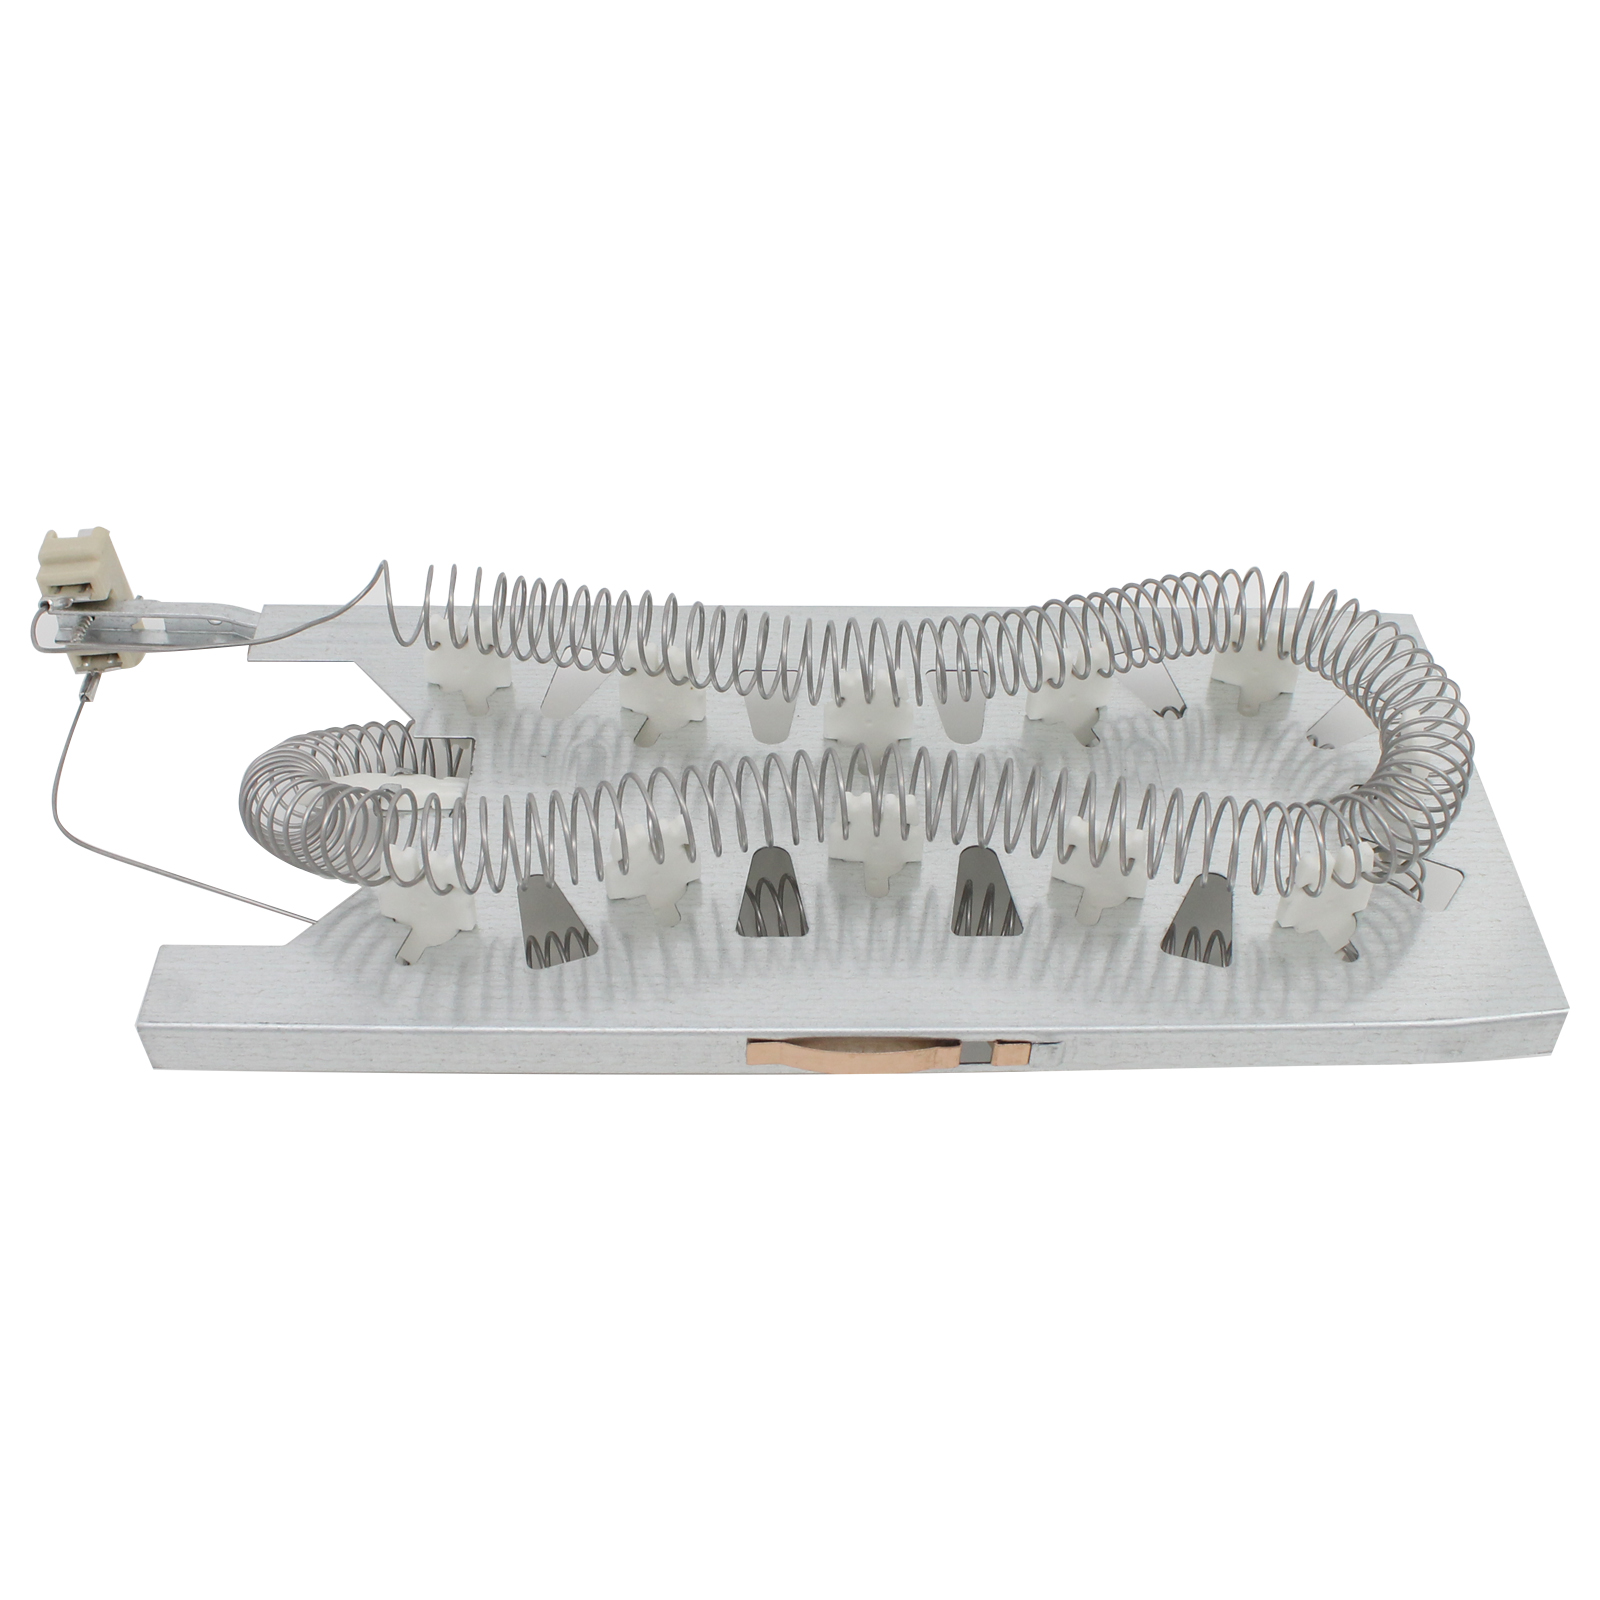 3387747 Dryer Heating Element & 279769 Thermal Cut-Off Kit Replacement for Kenmore / Sears 11096595420 Dryer - Compatible with WP3387747 & 279769 Heater Element & Thermal Fuse Kit - image 3 of 4